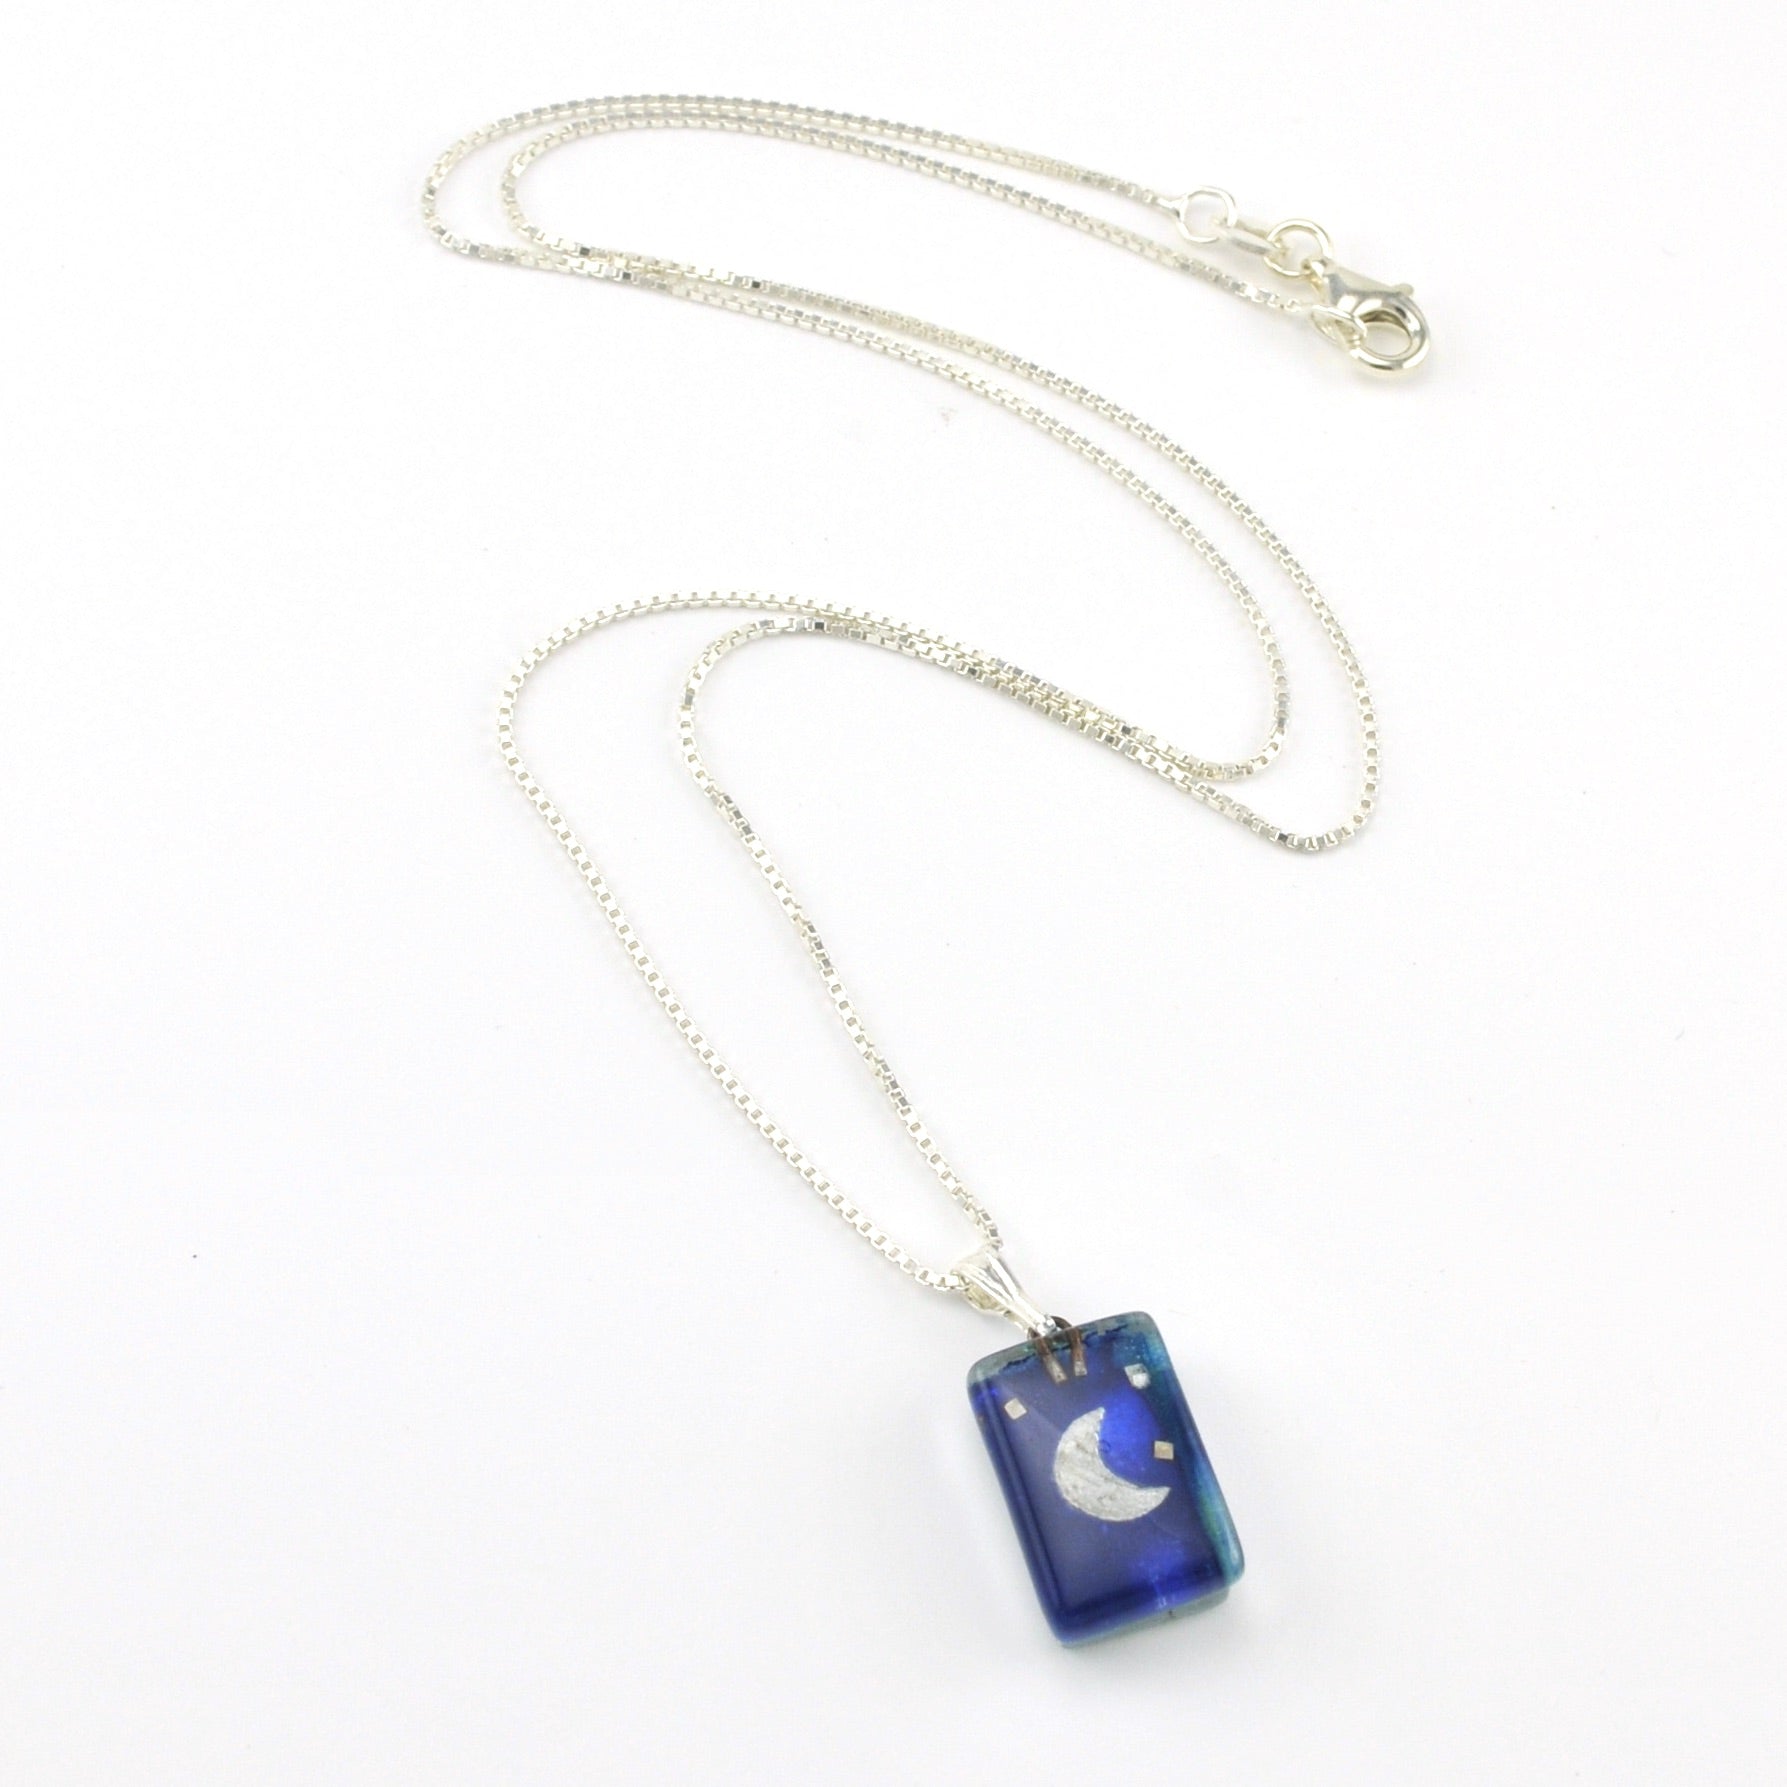 Glass Blue Moon Charm Necklace